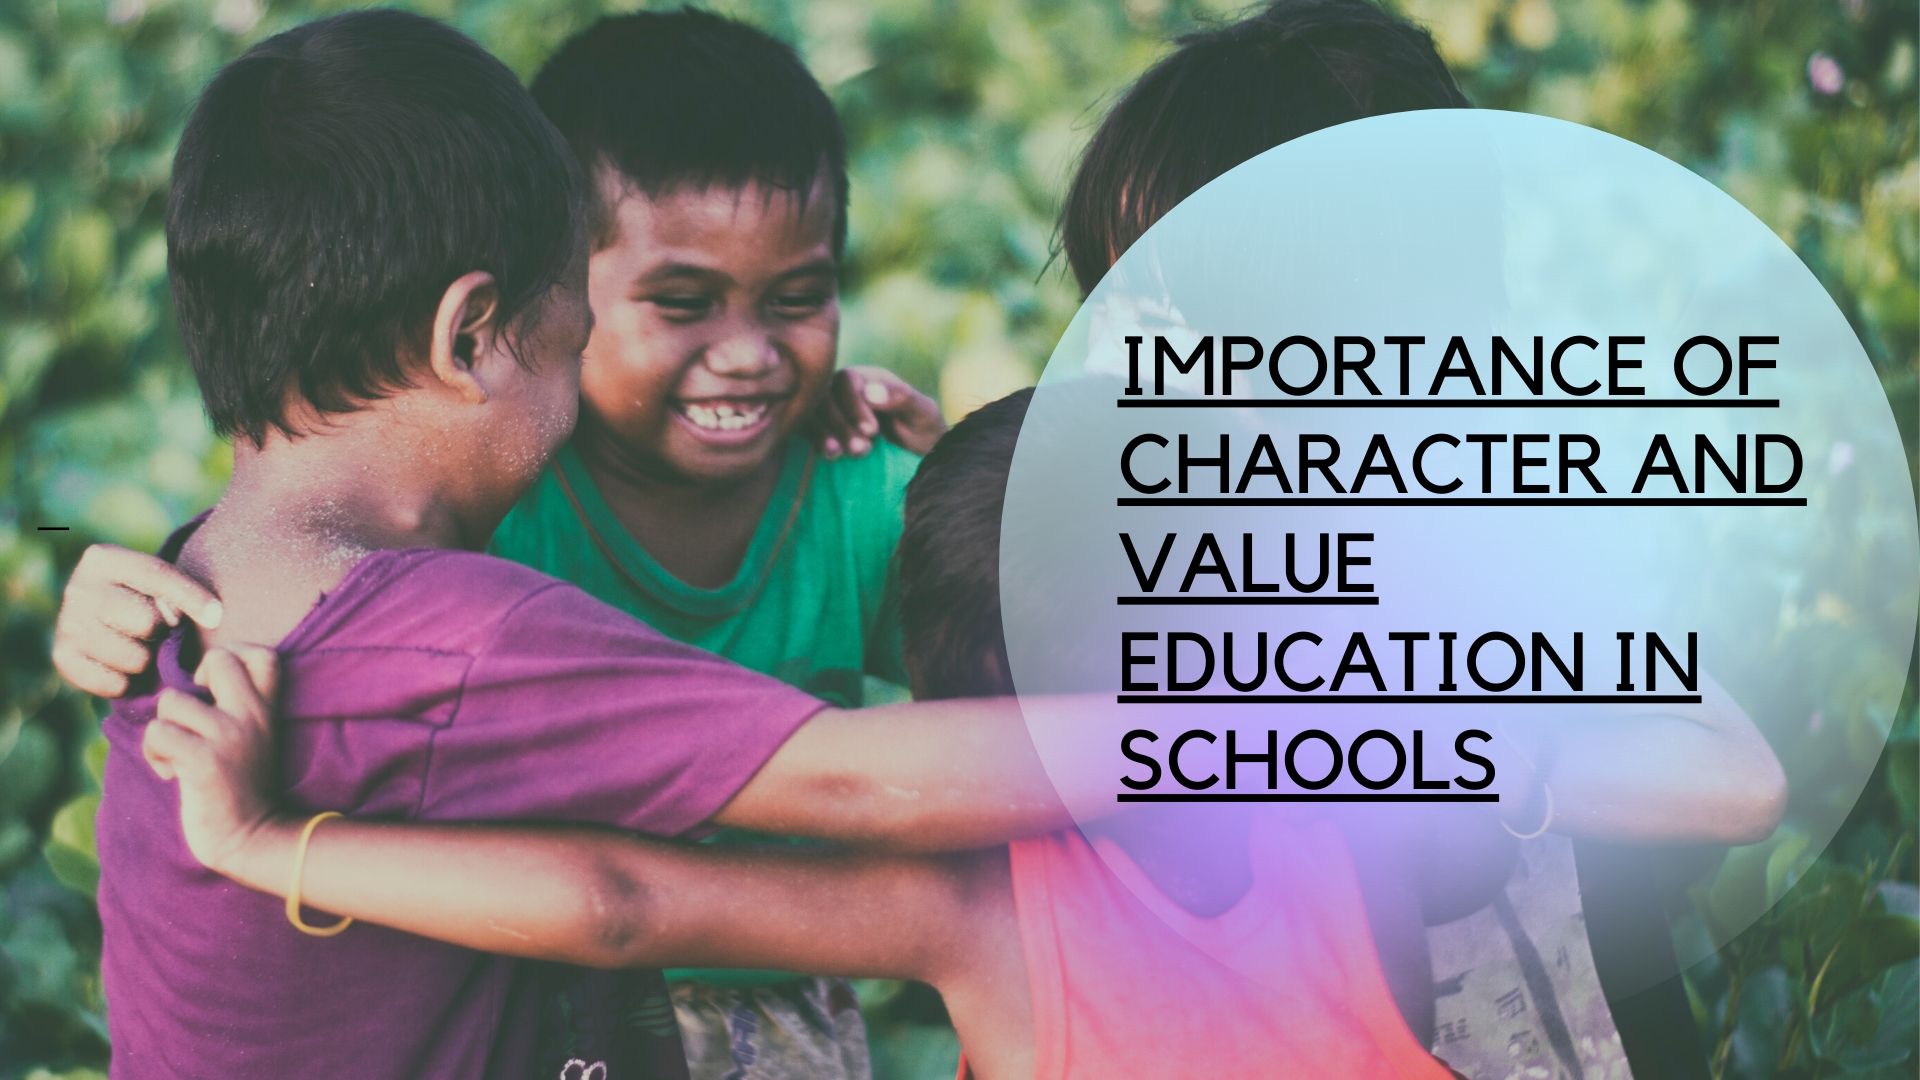 IMPORTANCE OF CHARACTER AND VALUE EDUCATION IN SCHOOLS